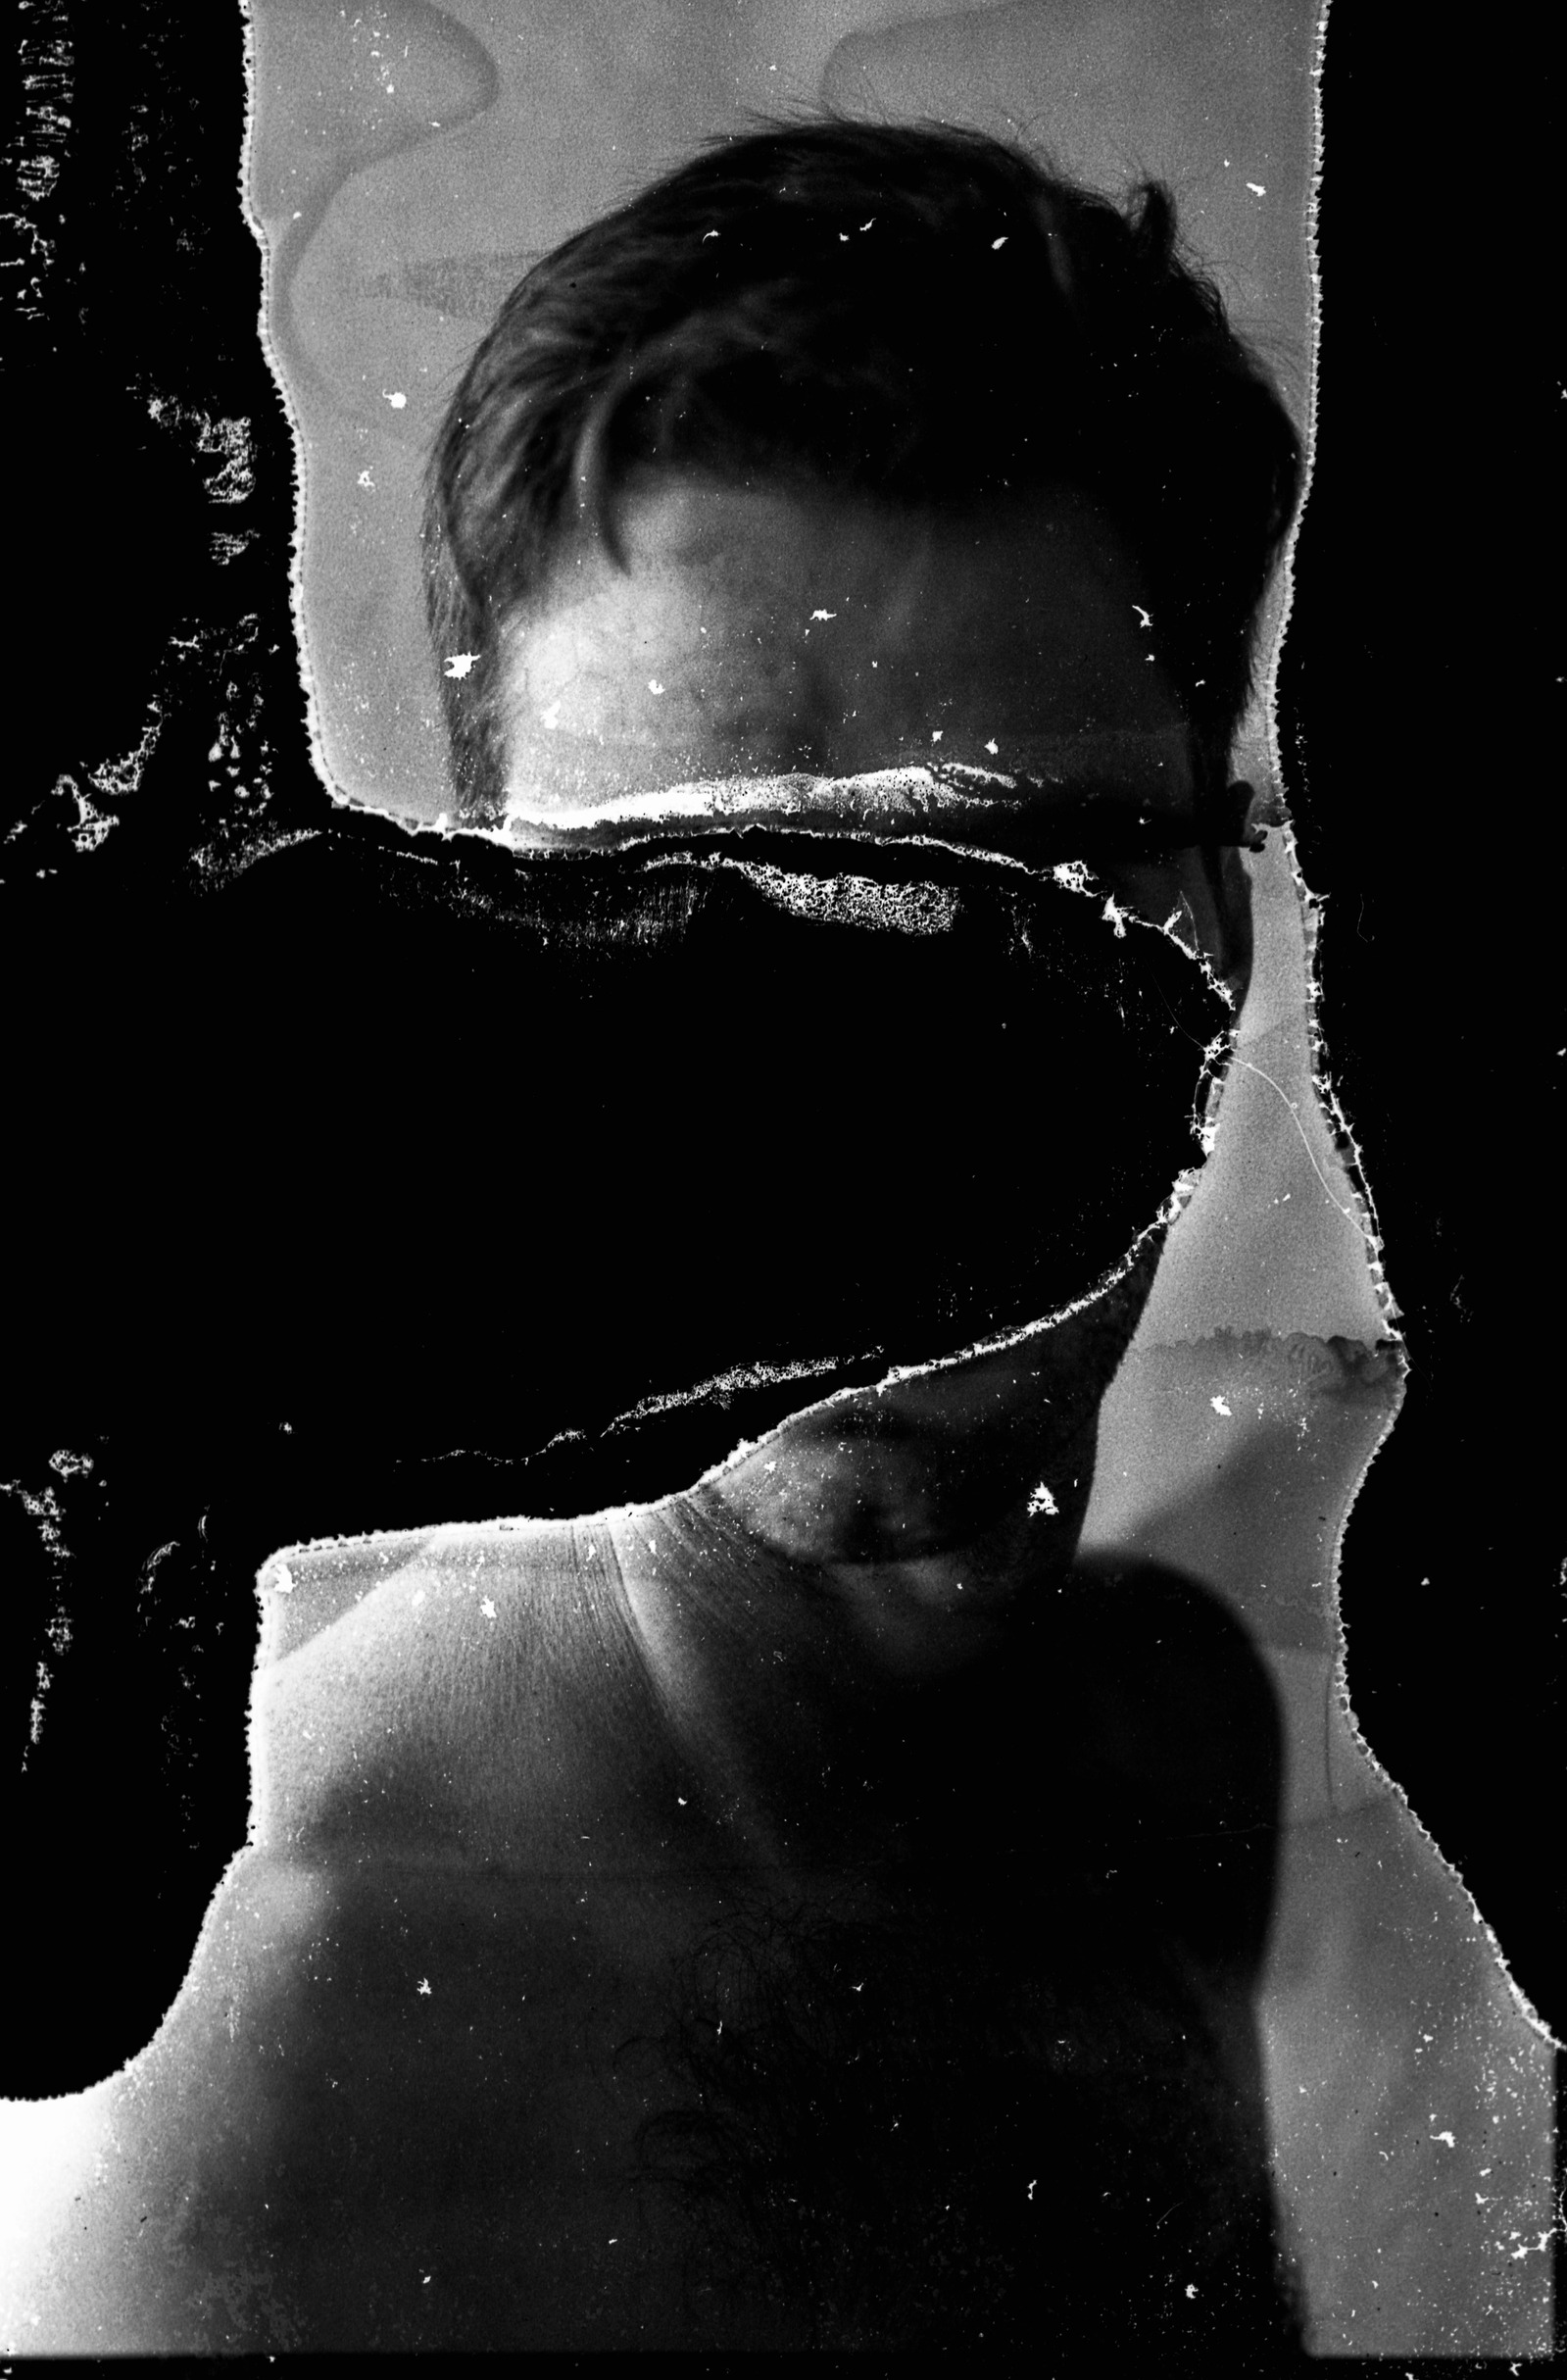 Self-portrait shot on black and white film. Prior to exposure, the film was soaked for two days in a solution containing dissolved instant coffee and two doses of sertraline (a reuptake serotonin inhibitor used to treat anxiety and depression).